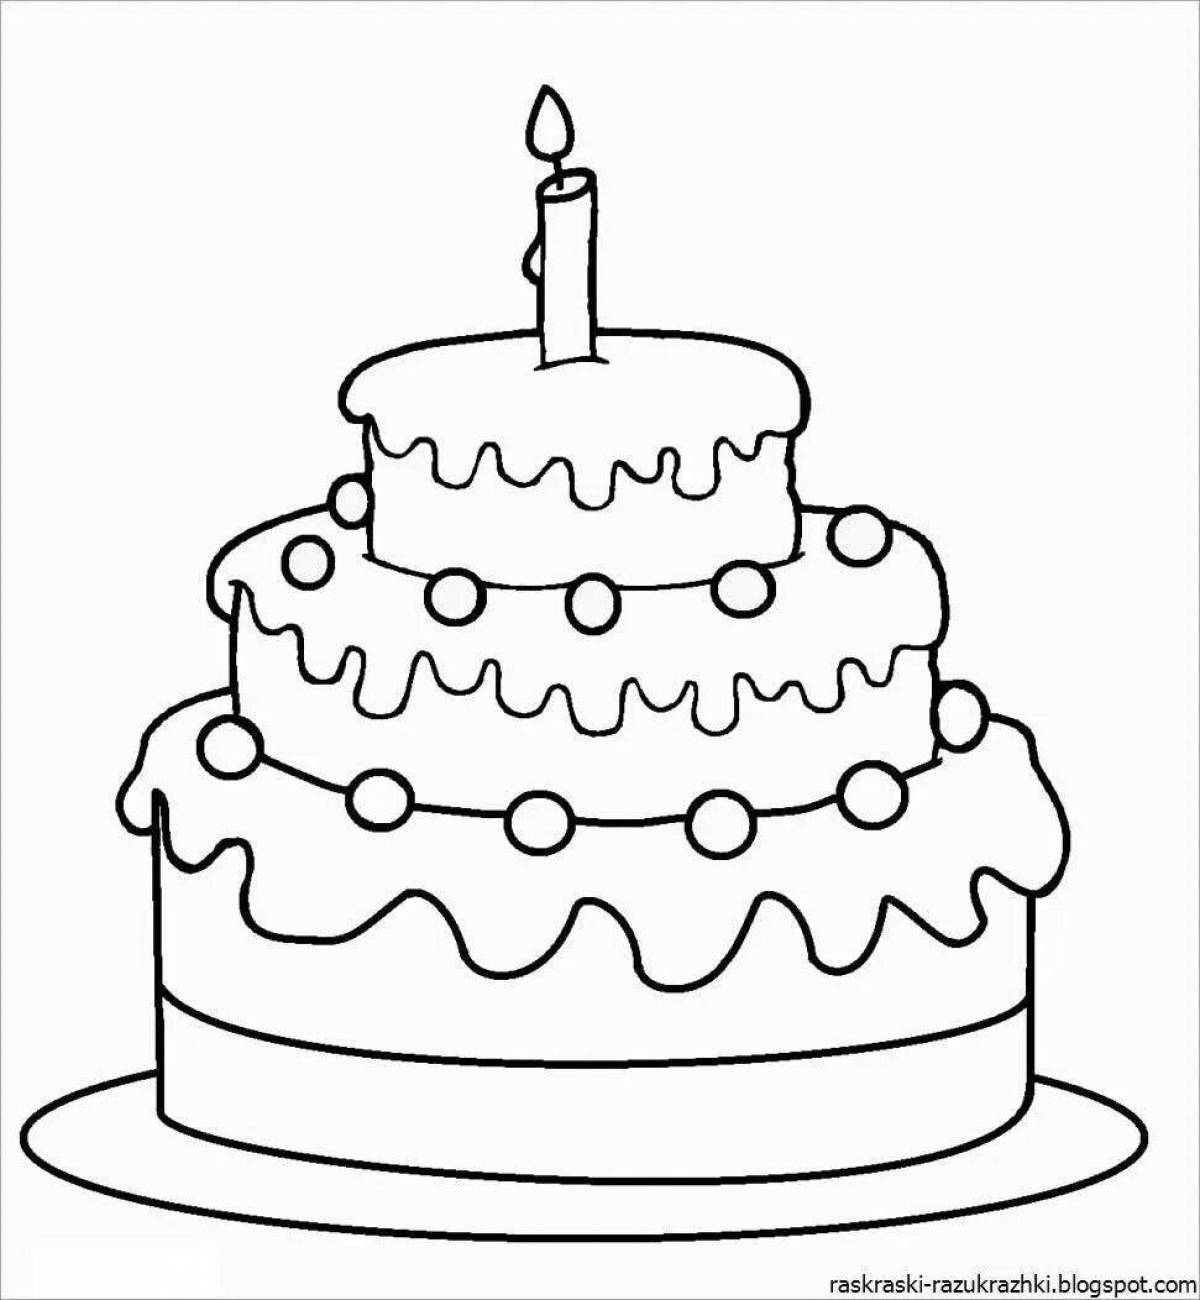 Coloring cake coloring page for 3-4 year olds